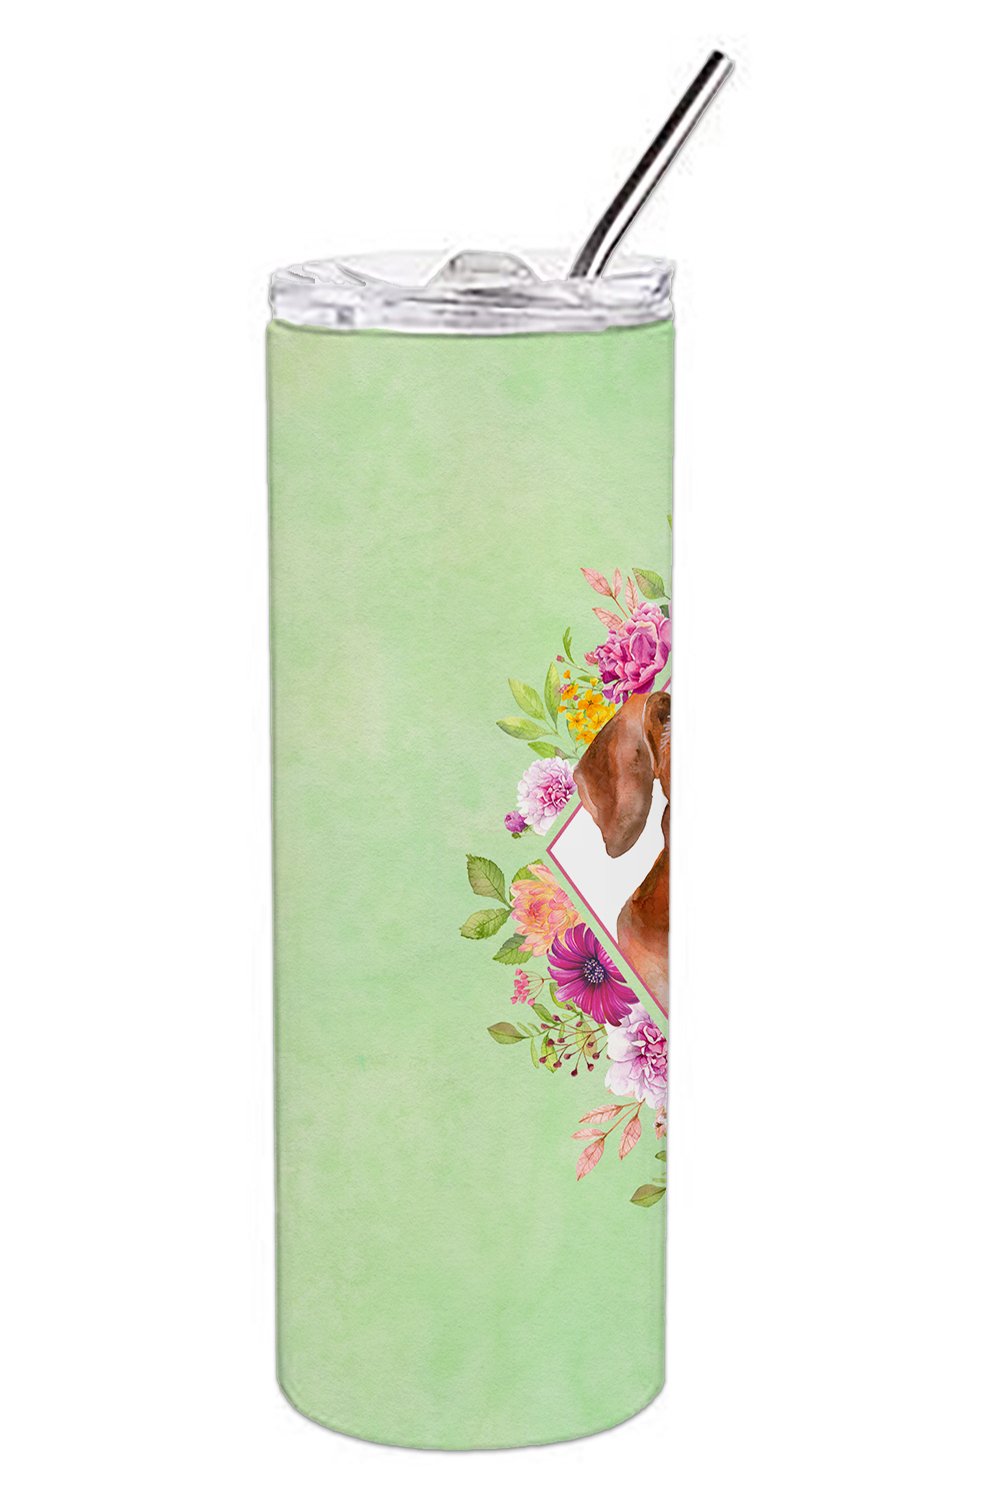 Dachshund Red #2 Green Flowers Double Walled Stainless Steel 20 oz Skinny Tumbler CK4295TBL20 by Caroline's Treasures